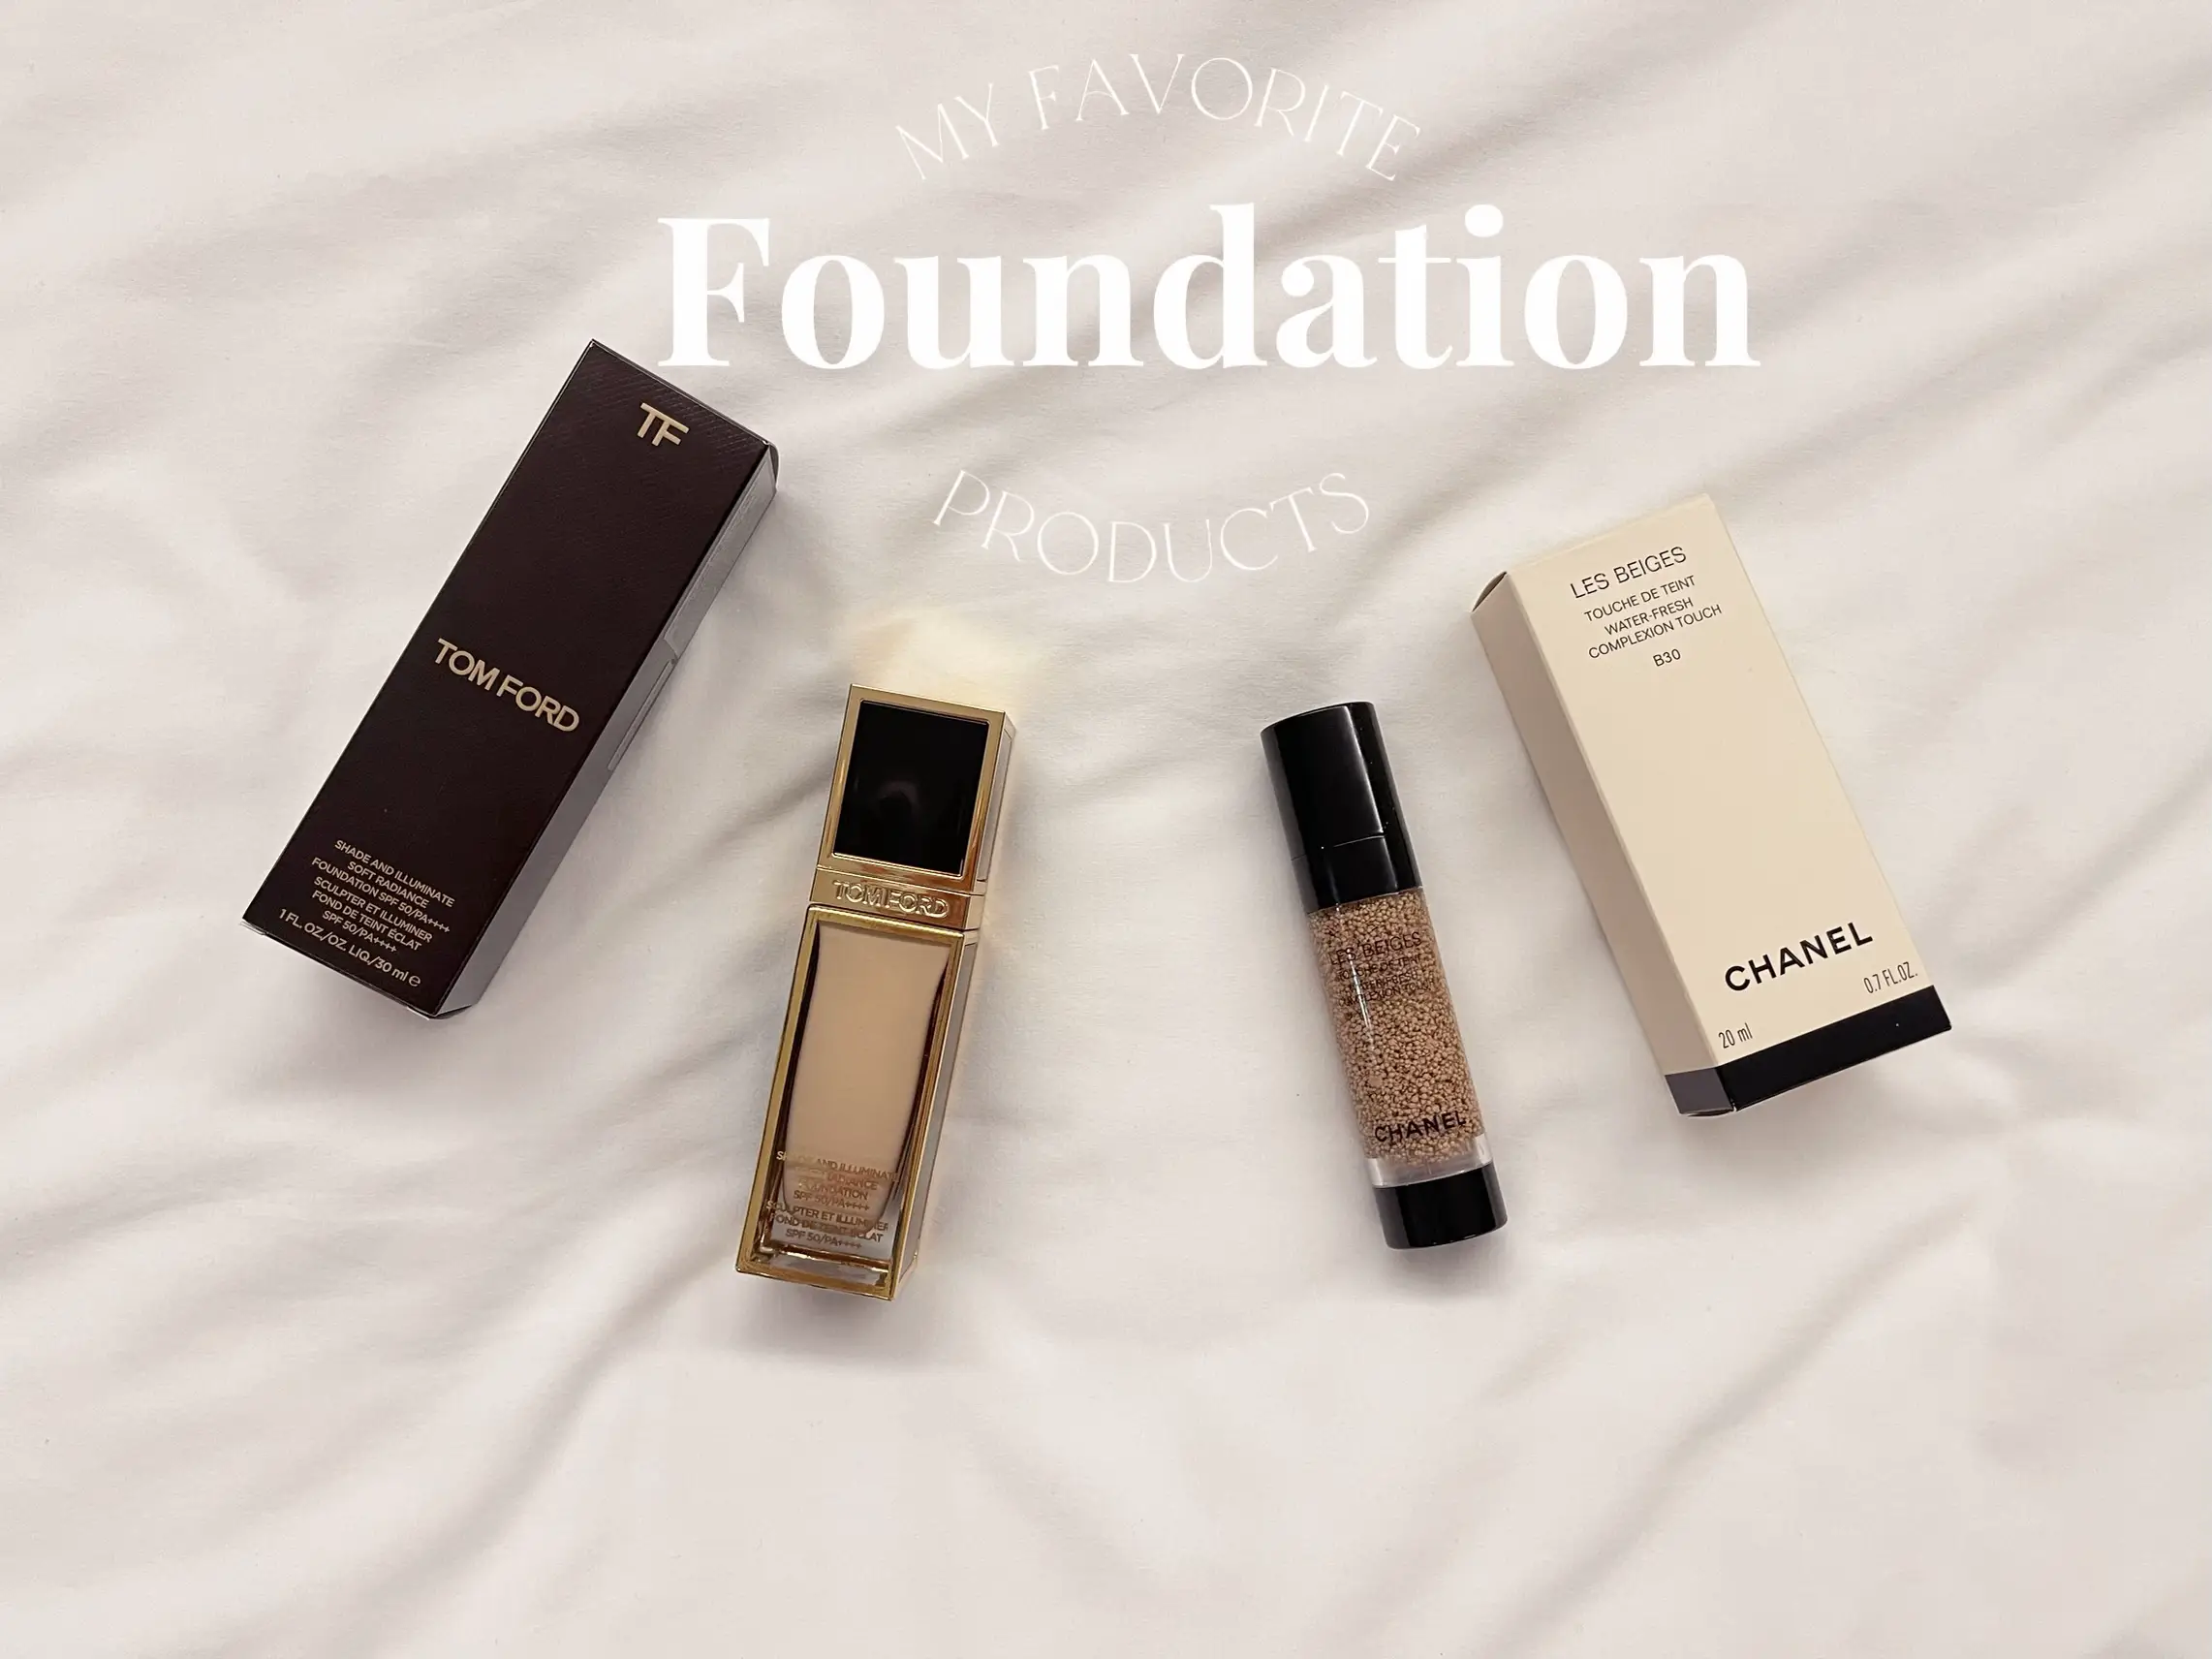 Tom Ford VS Chanel Foundation Review, Gallery posted by Punch